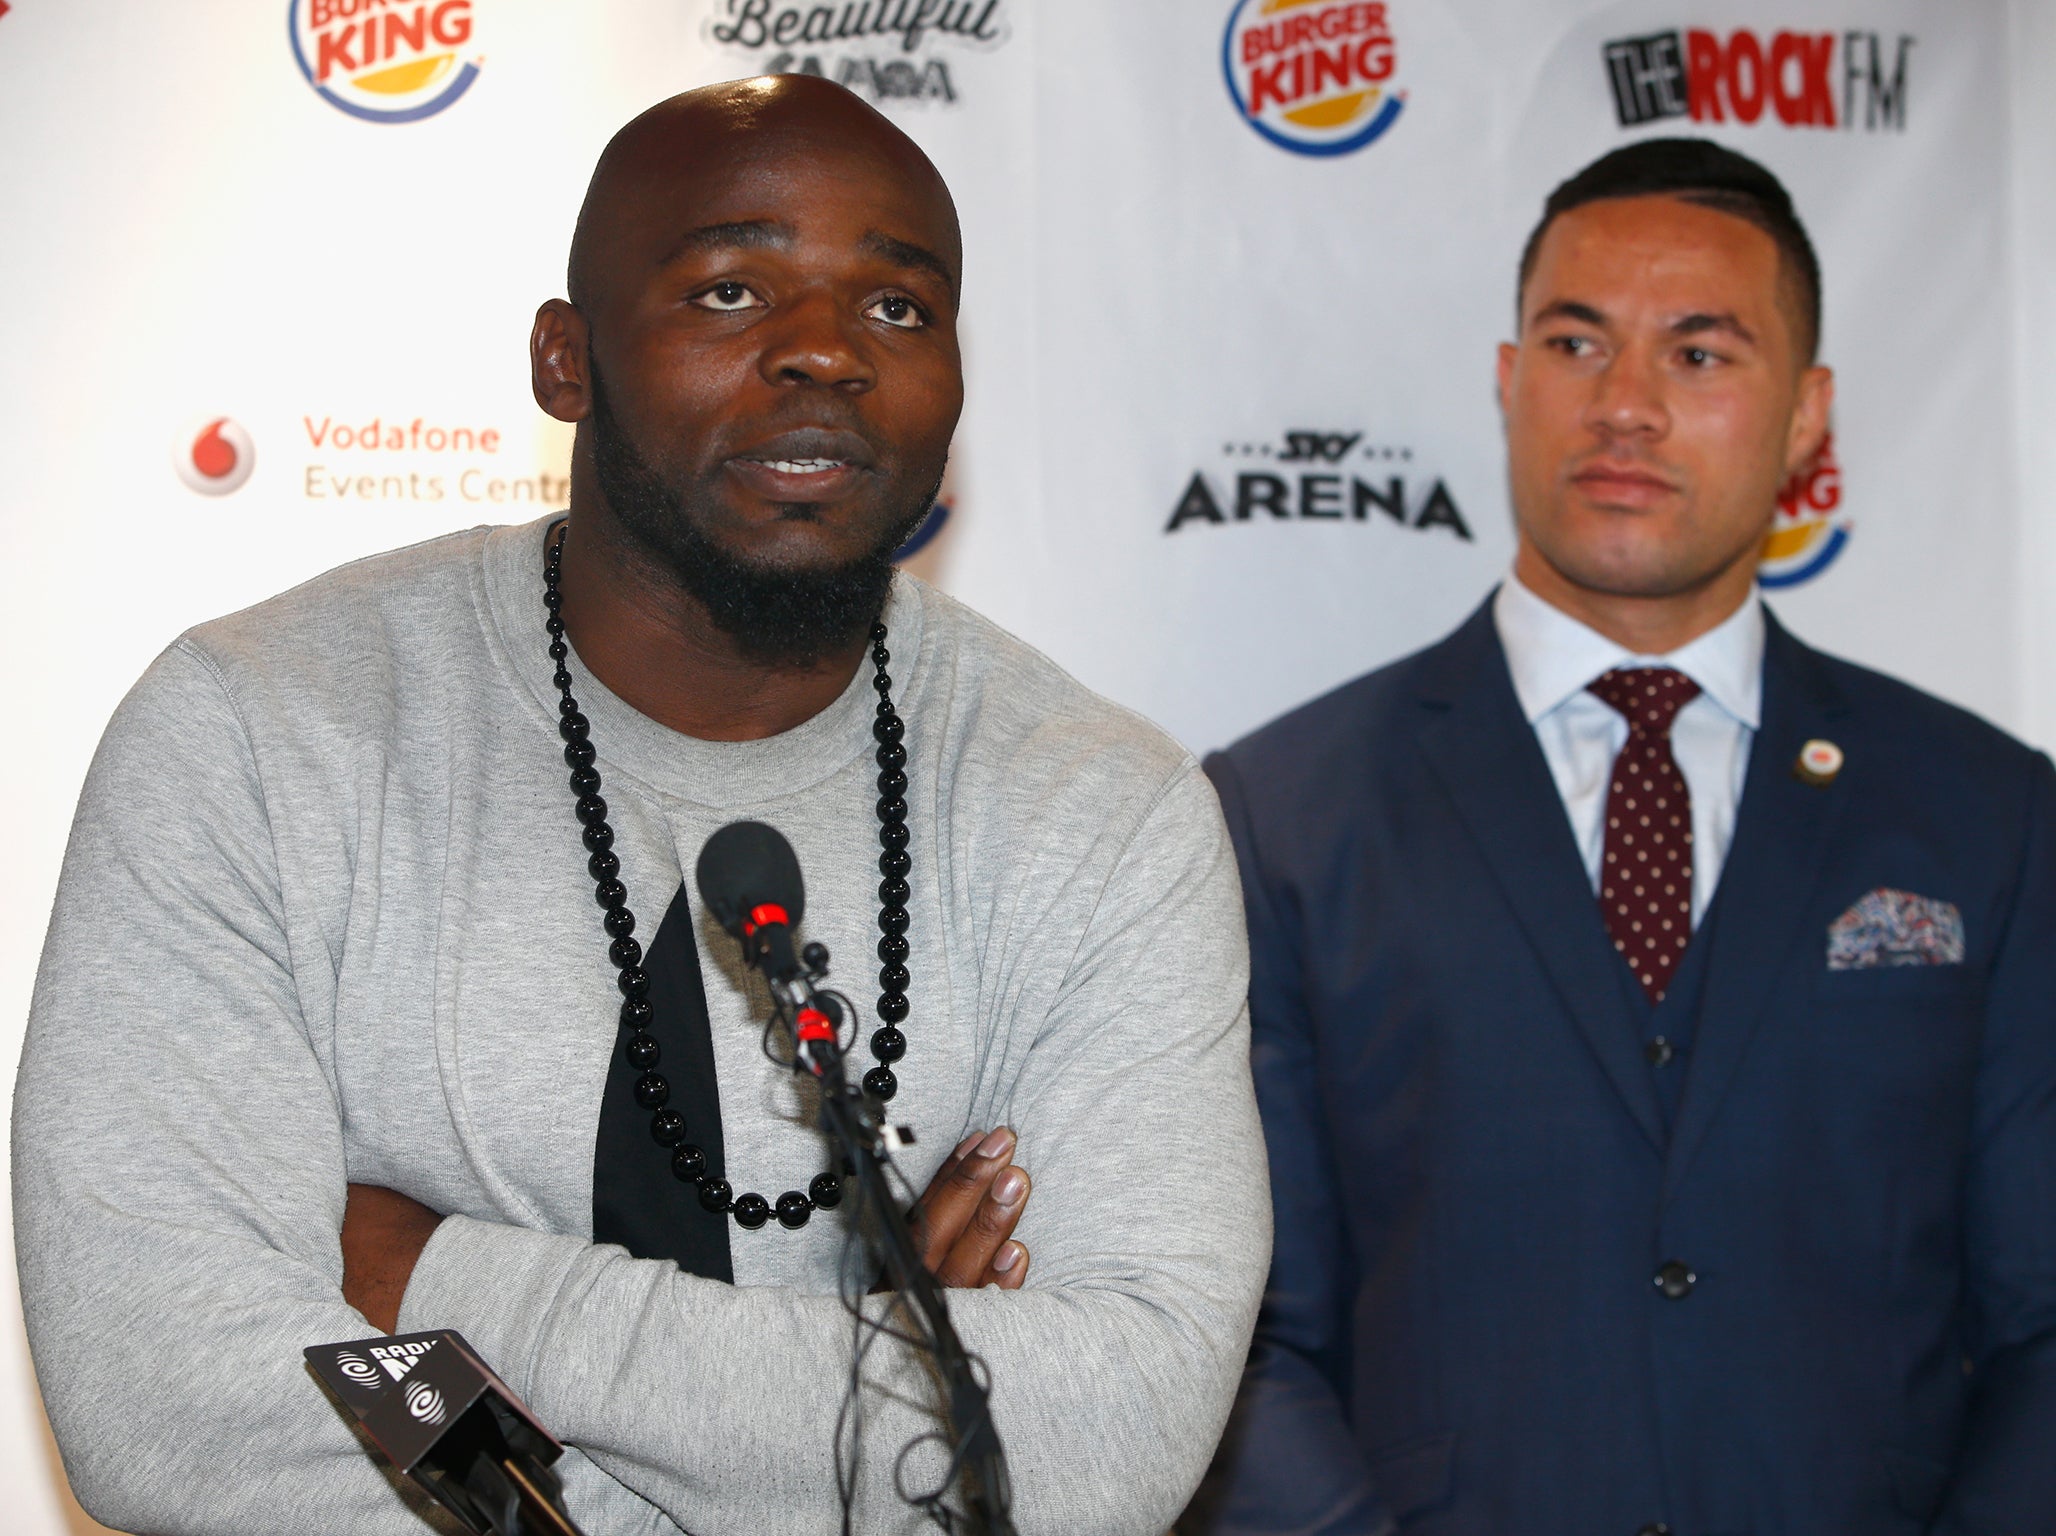 Takam insists he will not be intimated by the crowd